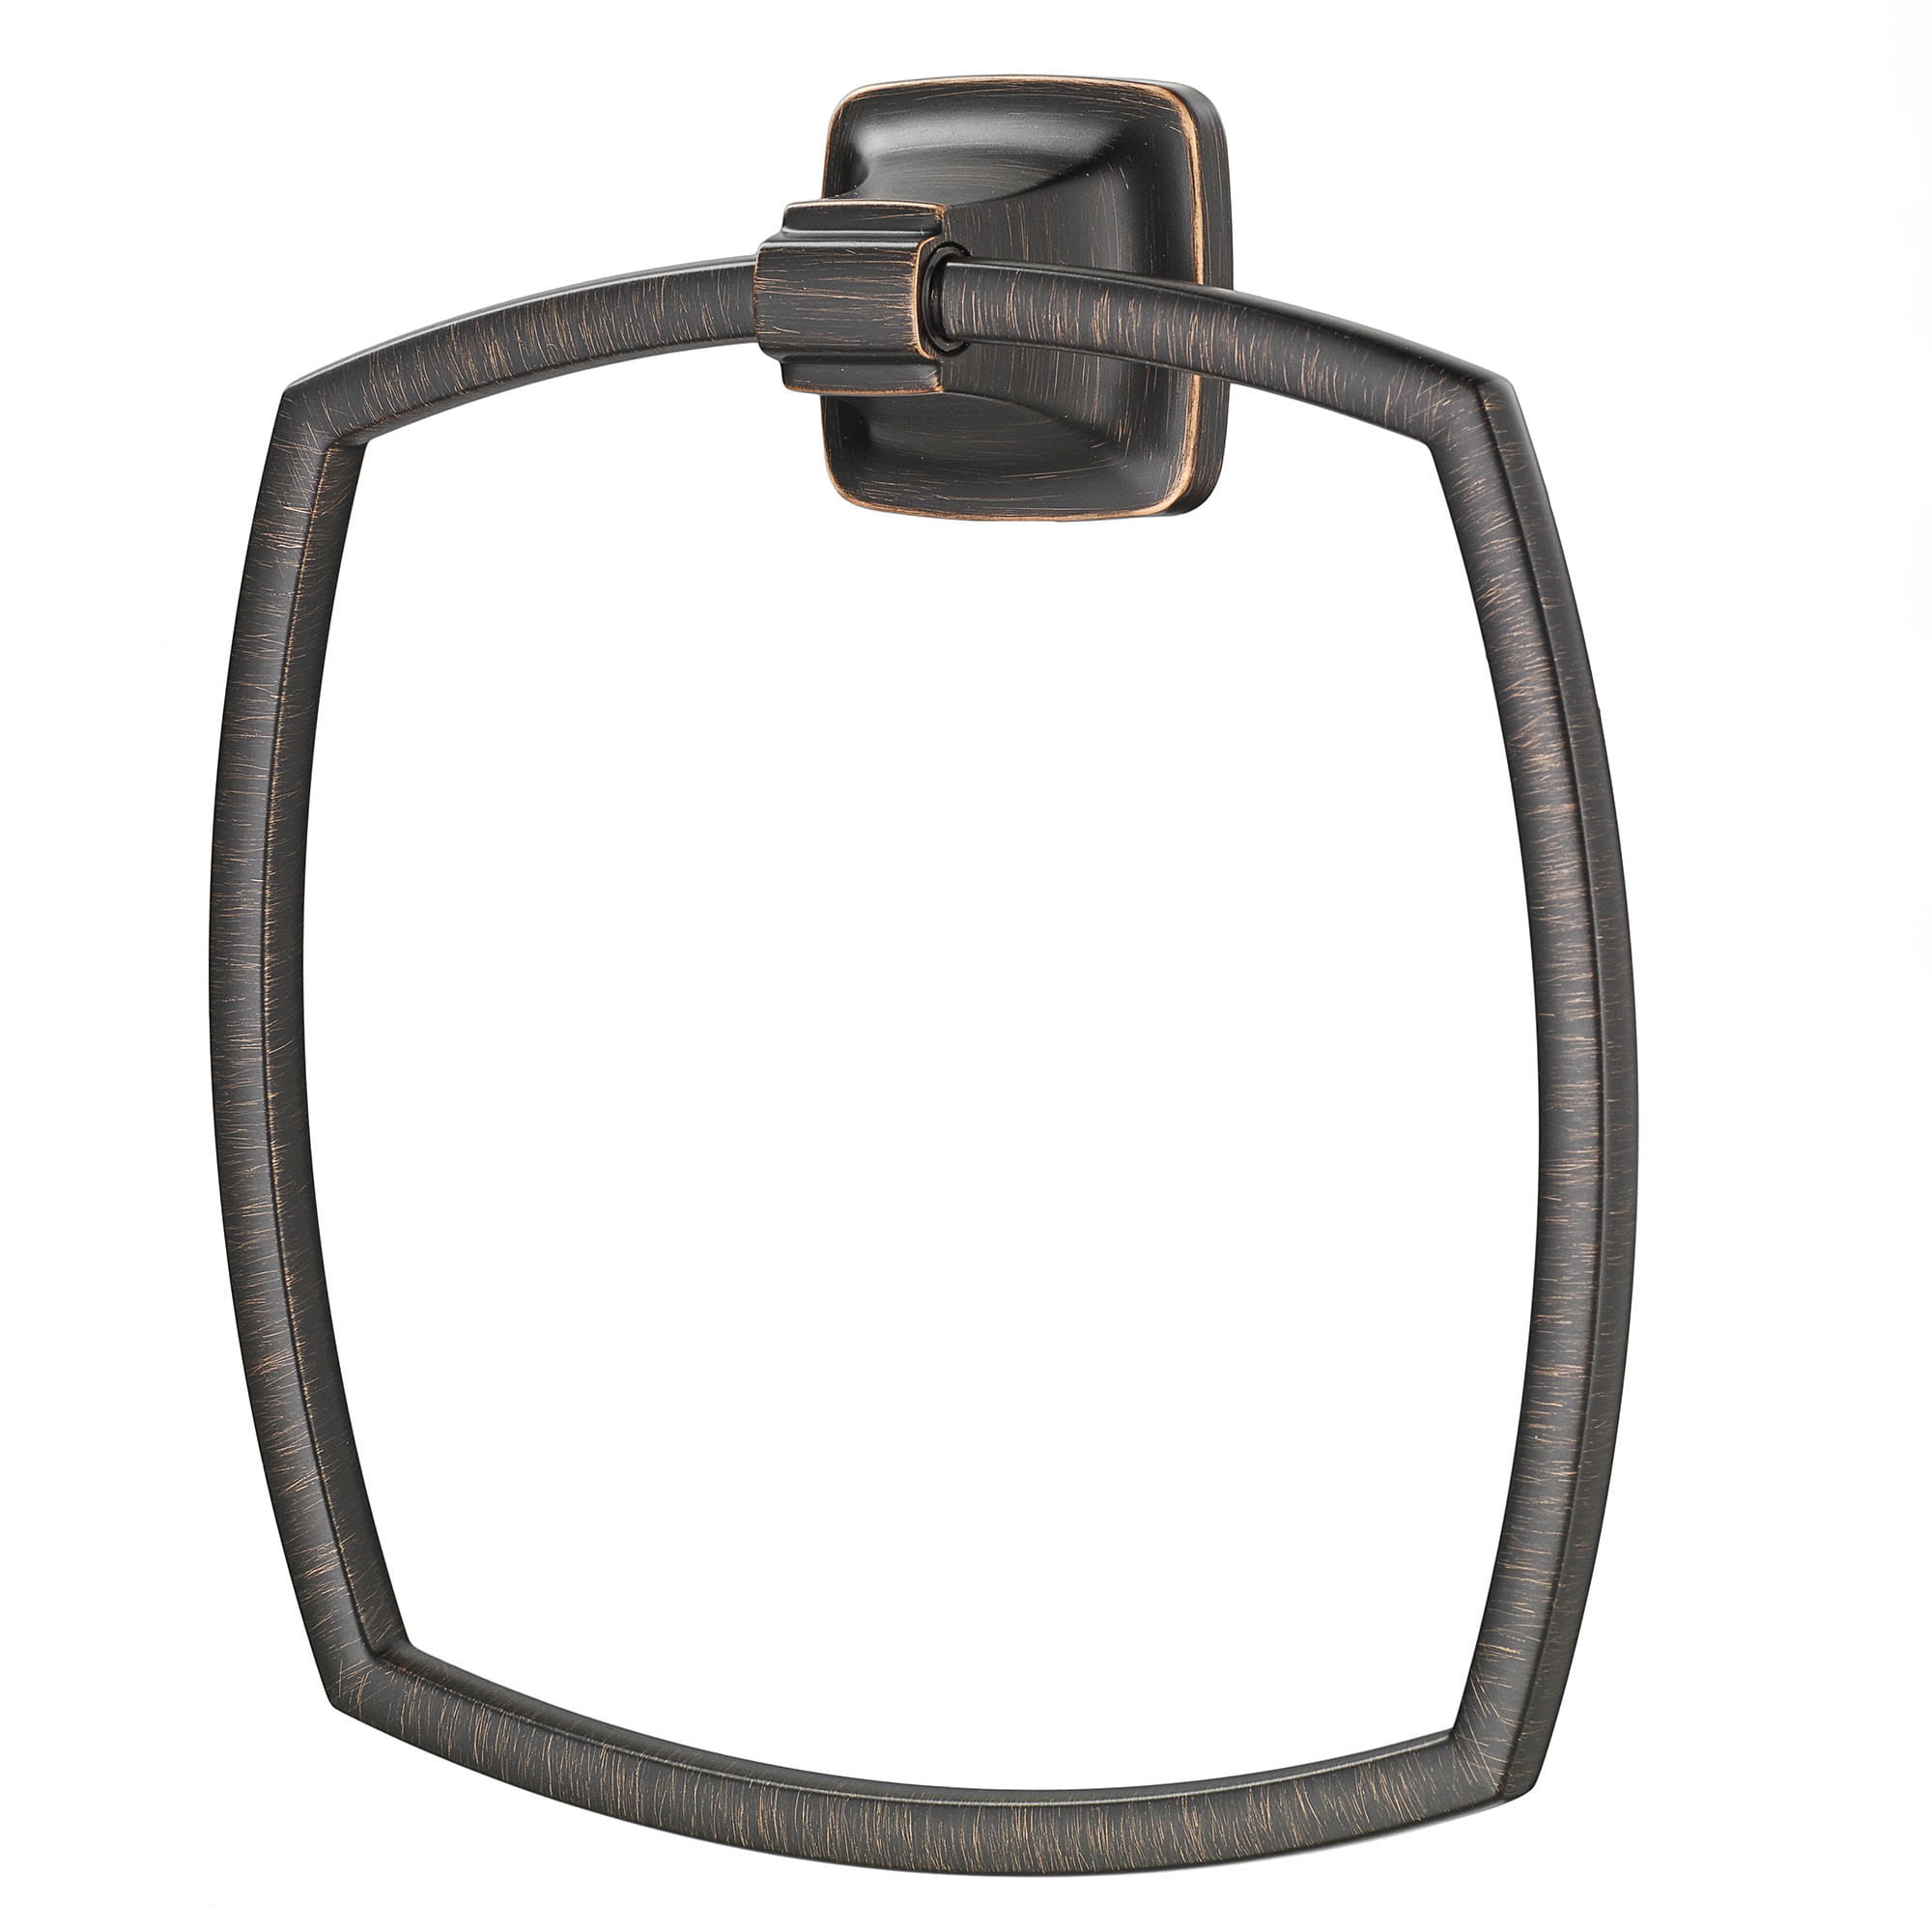 Townsend Towel Ring LEGACY BRONZE